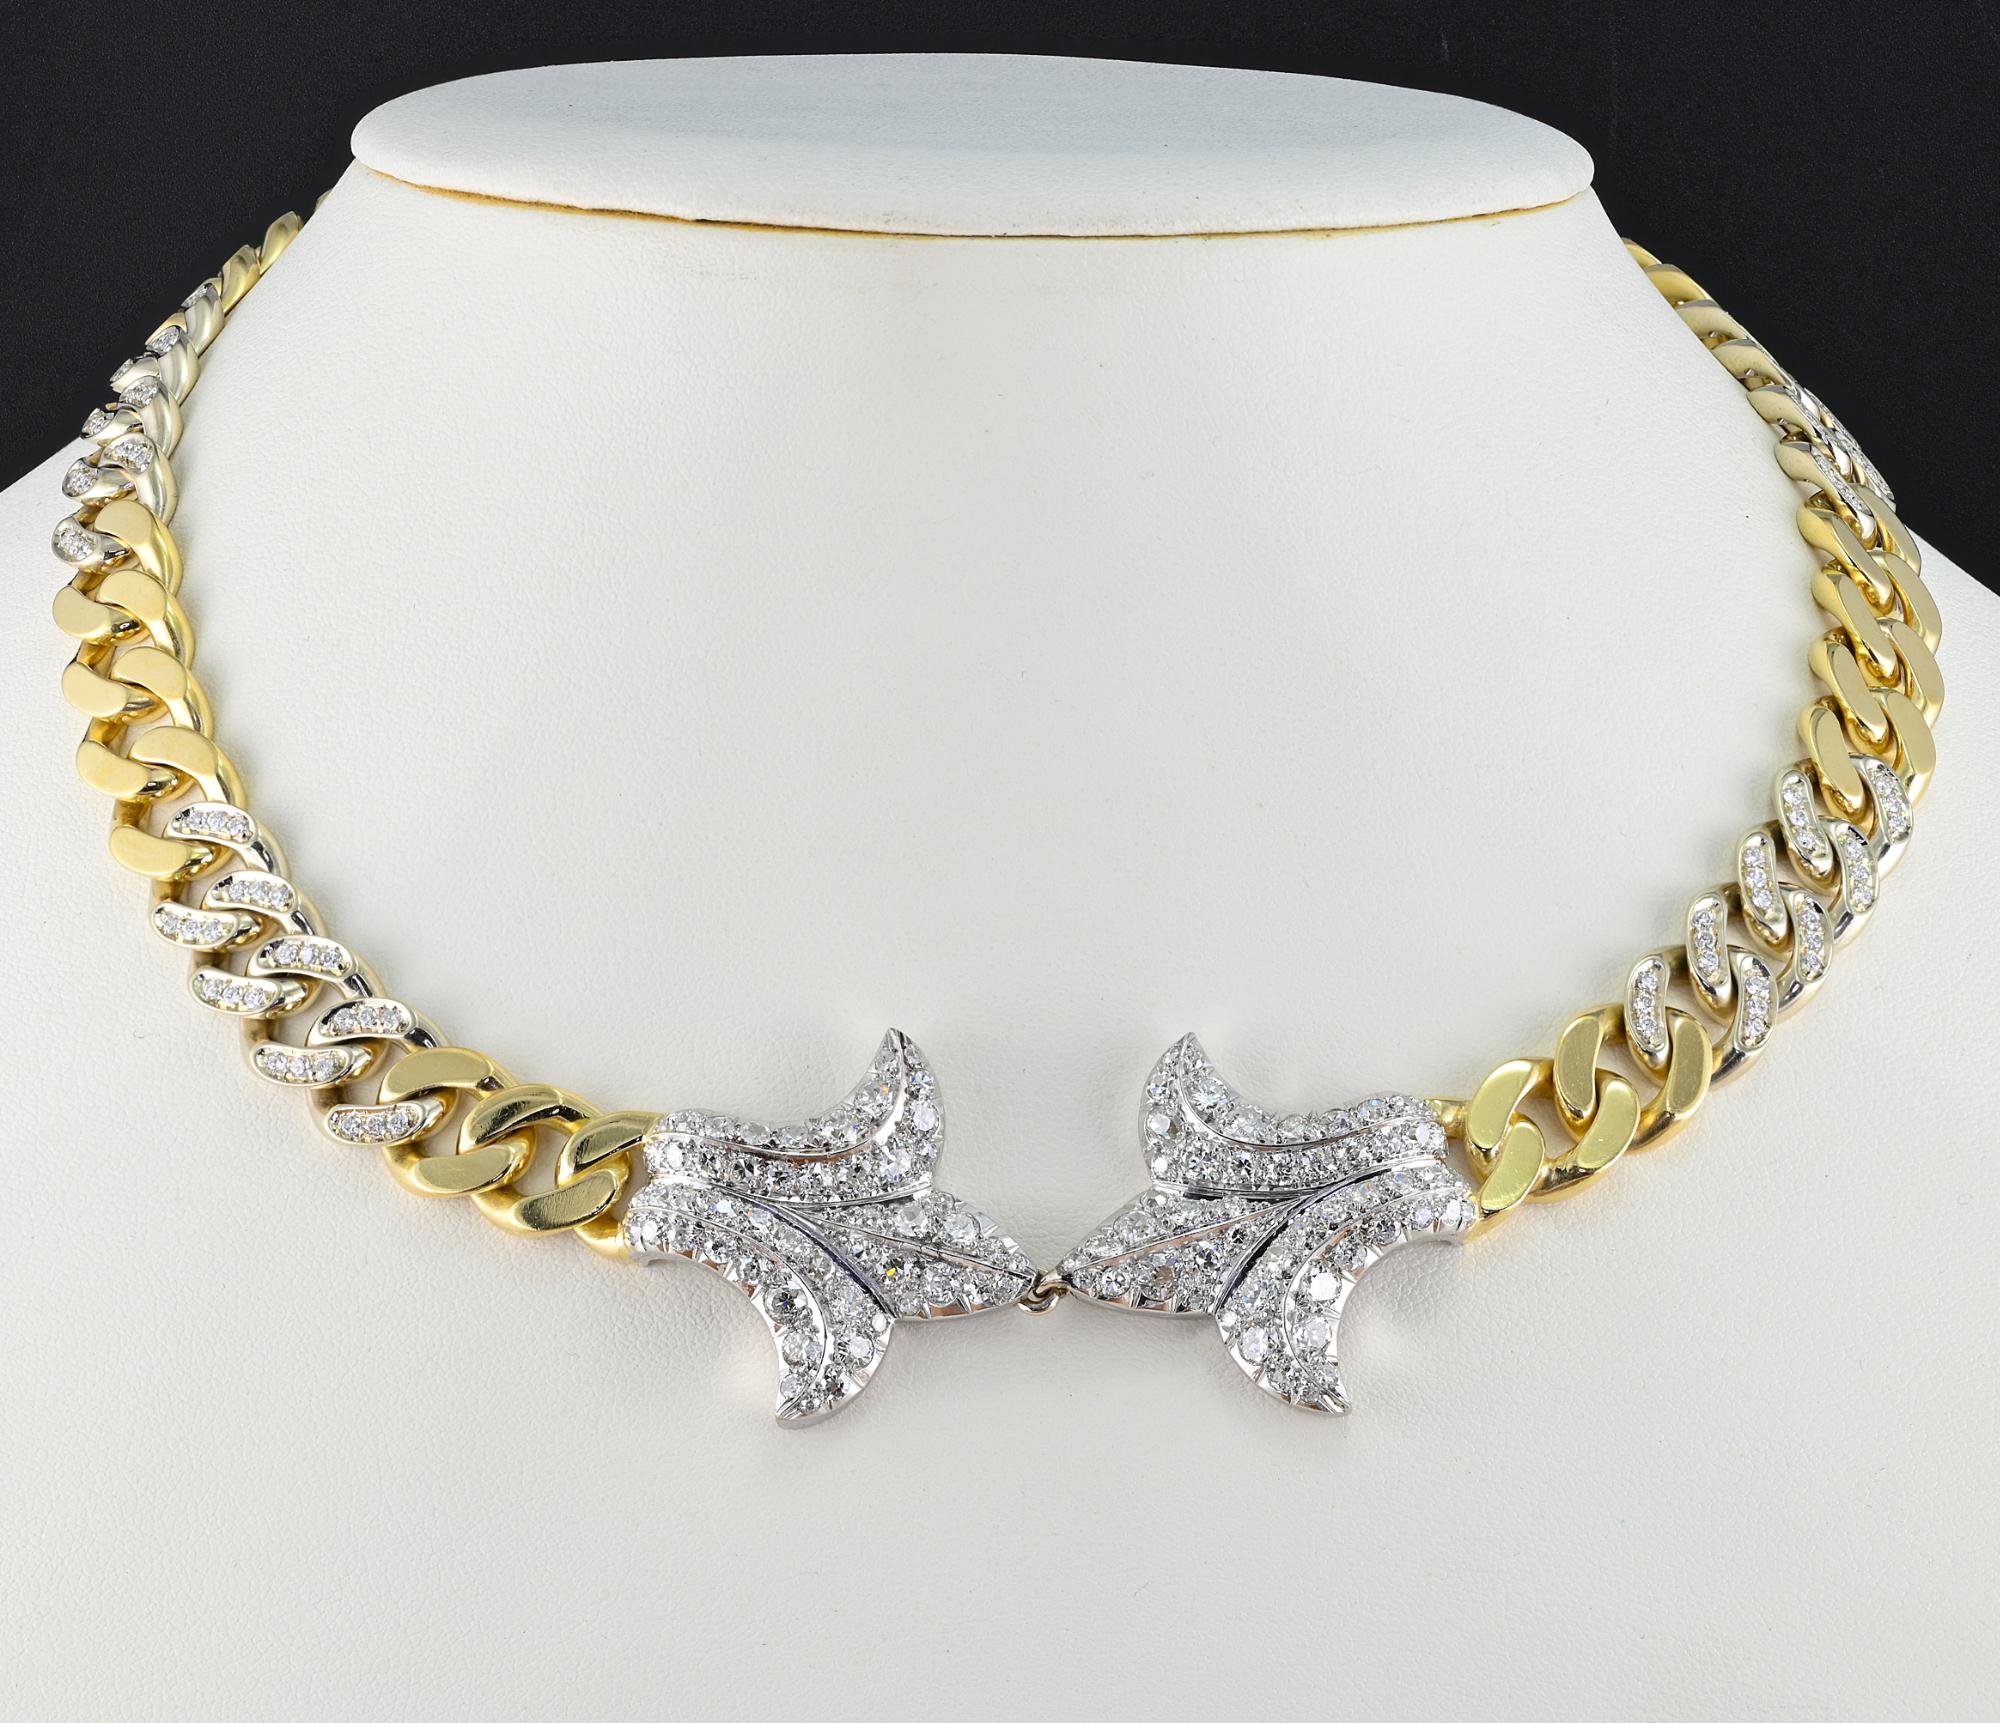 This marvellous retro necklace is 1945 circa bearing Italian hallmarks of the era
Constructed of solid 18 KT gold with a solid Platinum centre piece
Fine curb chain with alternating Diamond set links, approx 2.10 Ct G VVS
Fleur De Lys designed